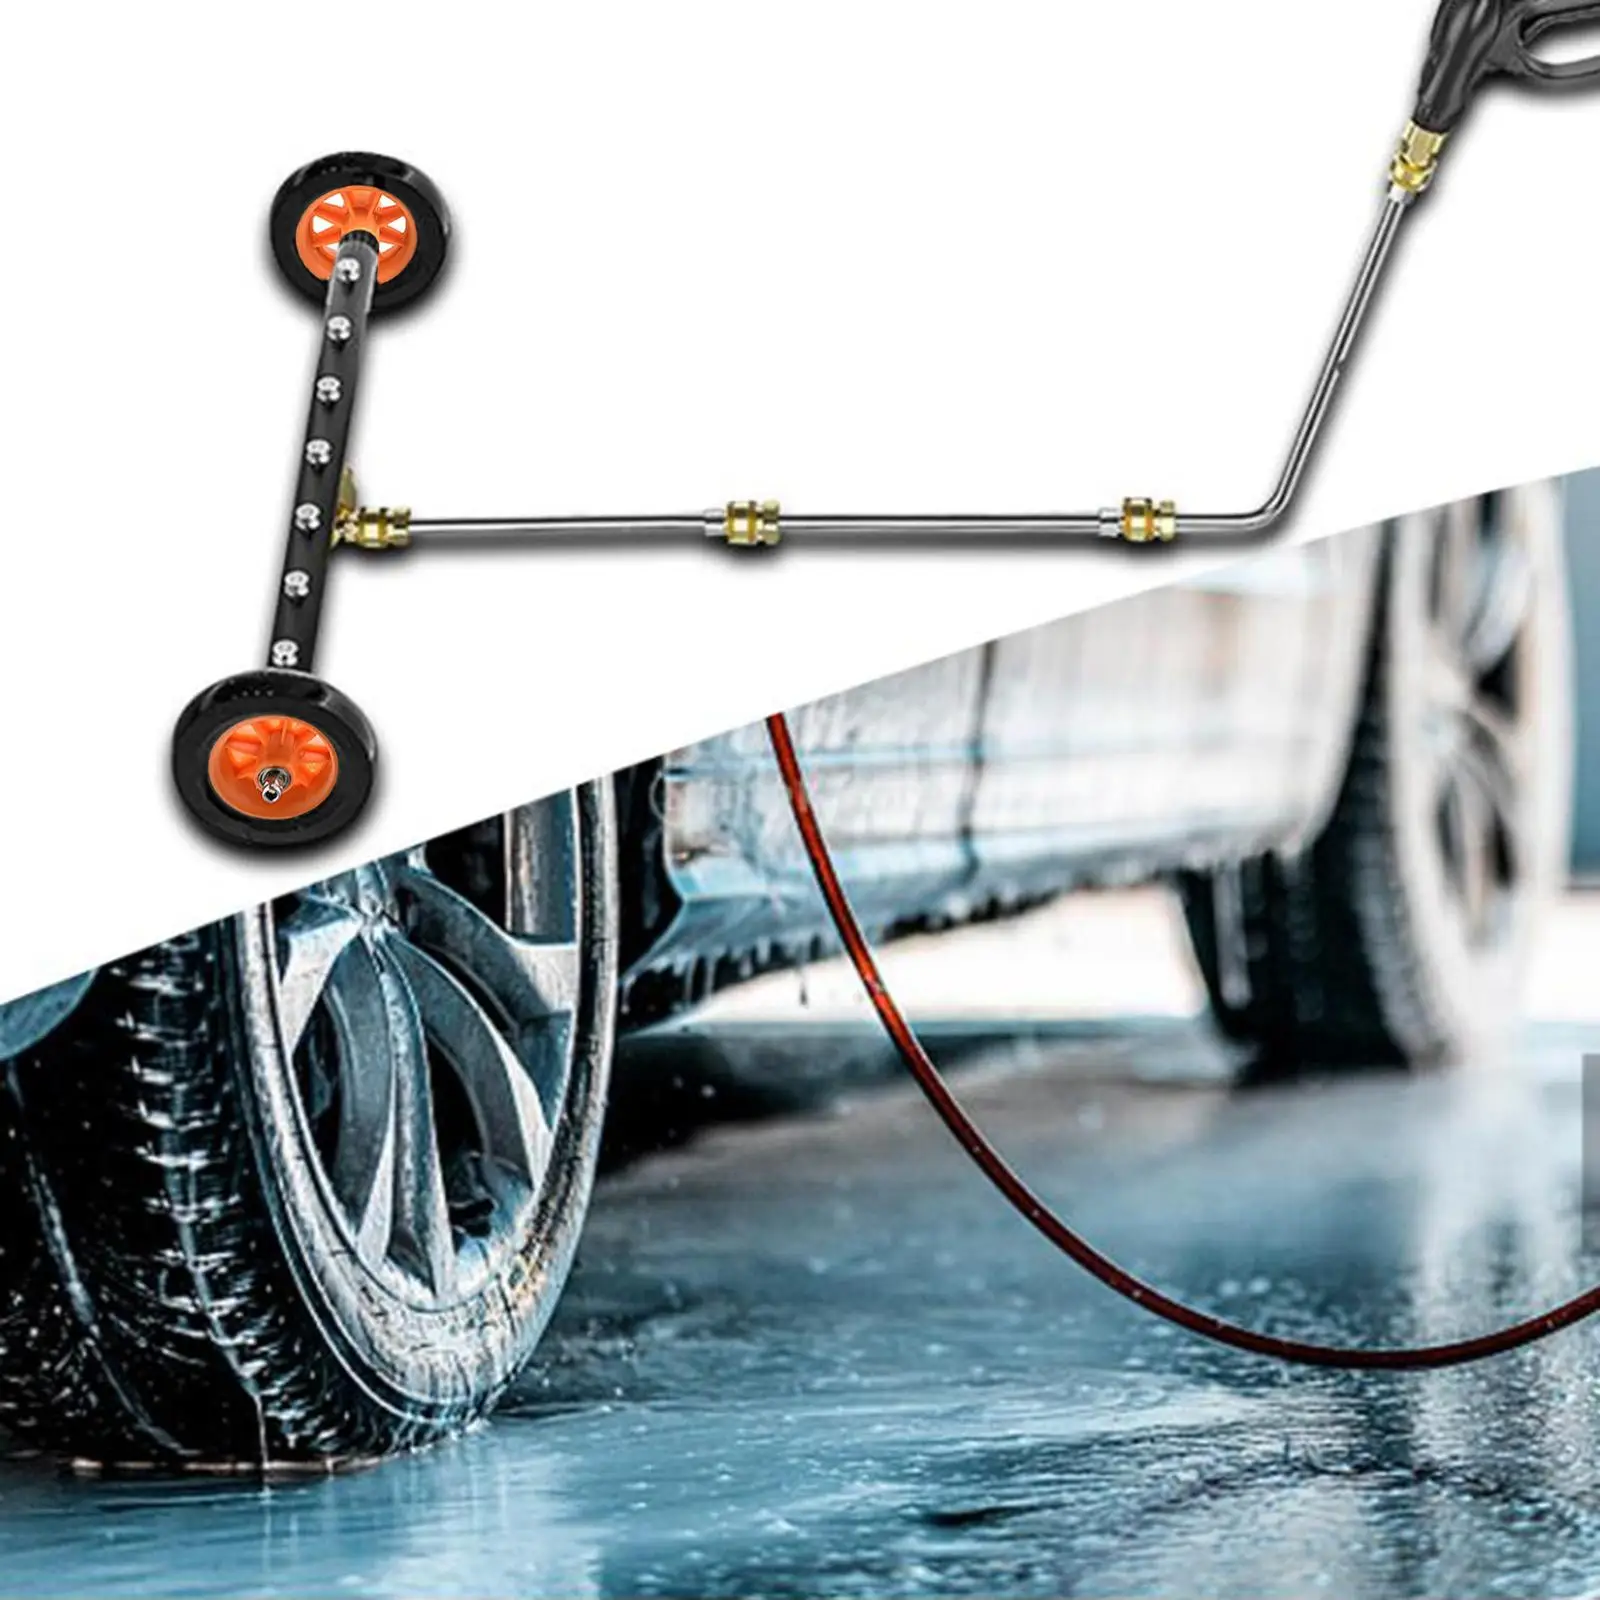 Undercarriage Water Broom 4000PSI Undercarriage Pressure Washing Cleaner under Car Washer Water Broom for Truck Vehicles SUV Car